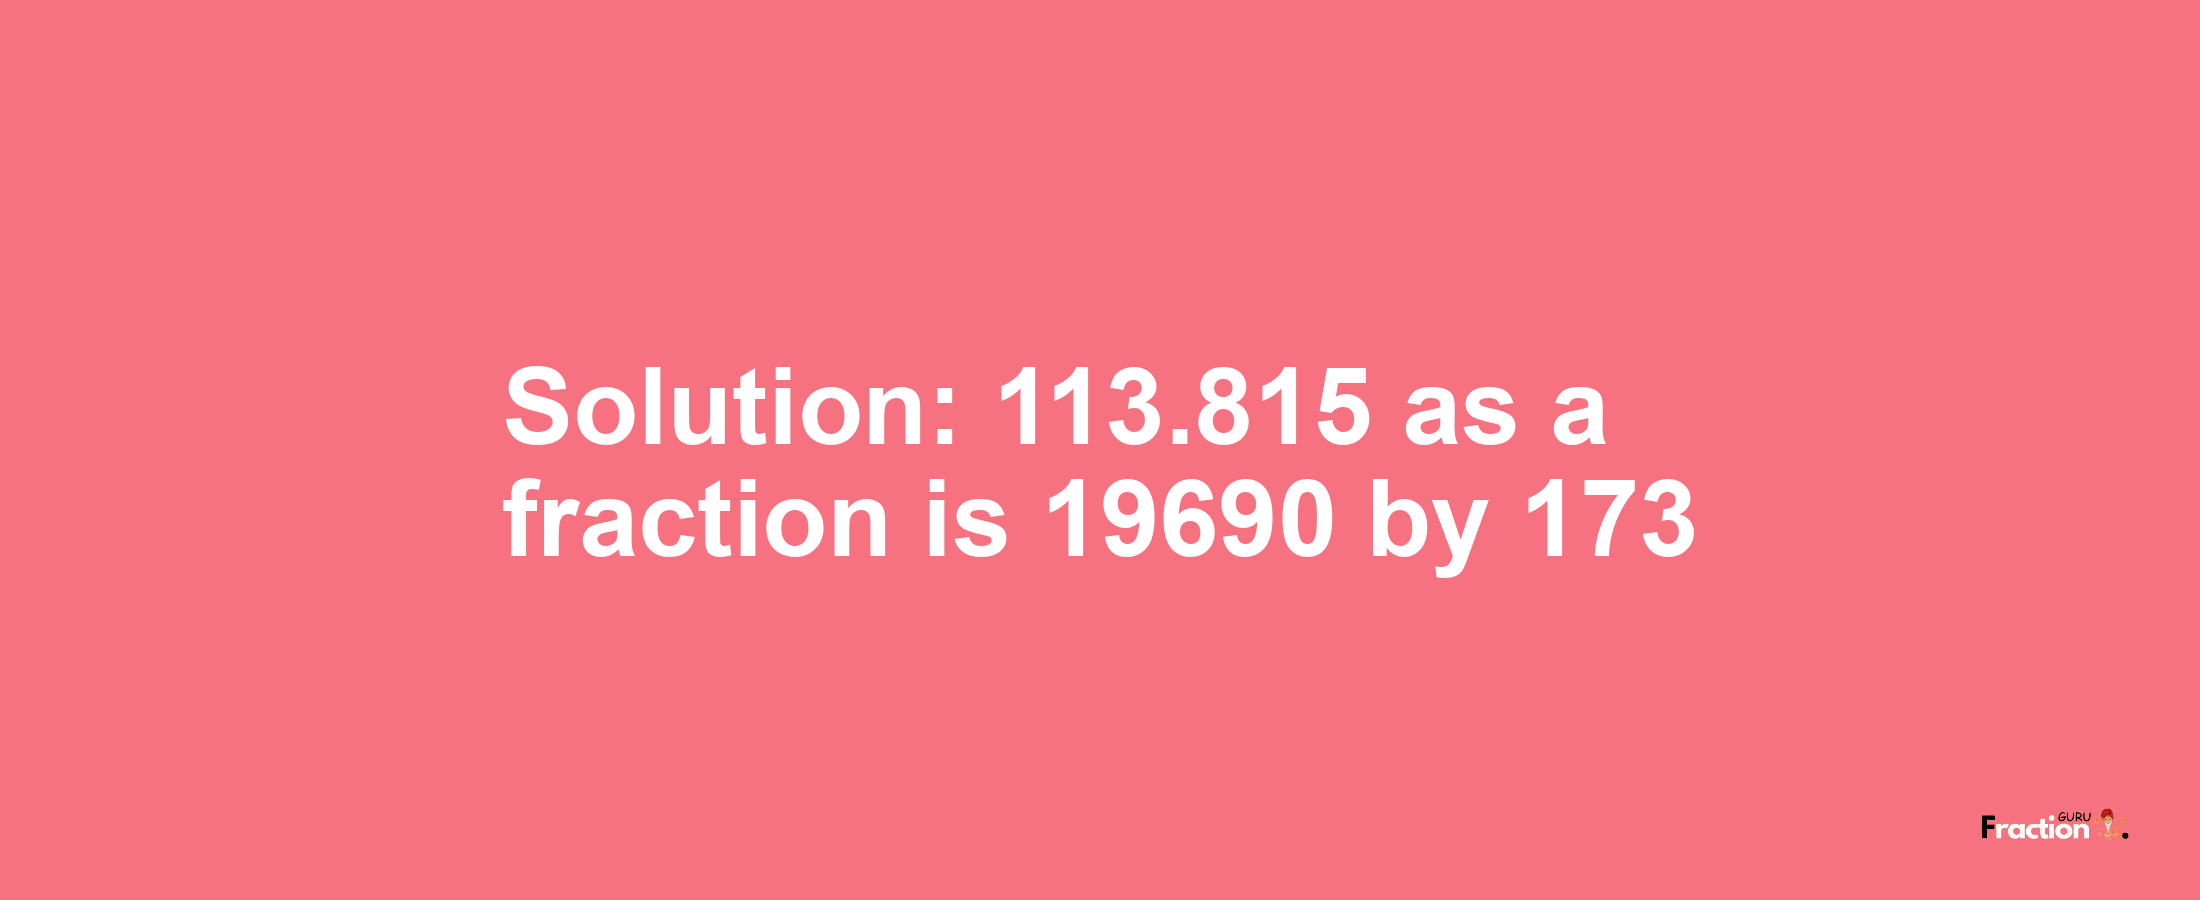 Solution:113.815 as a fraction is 19690/173